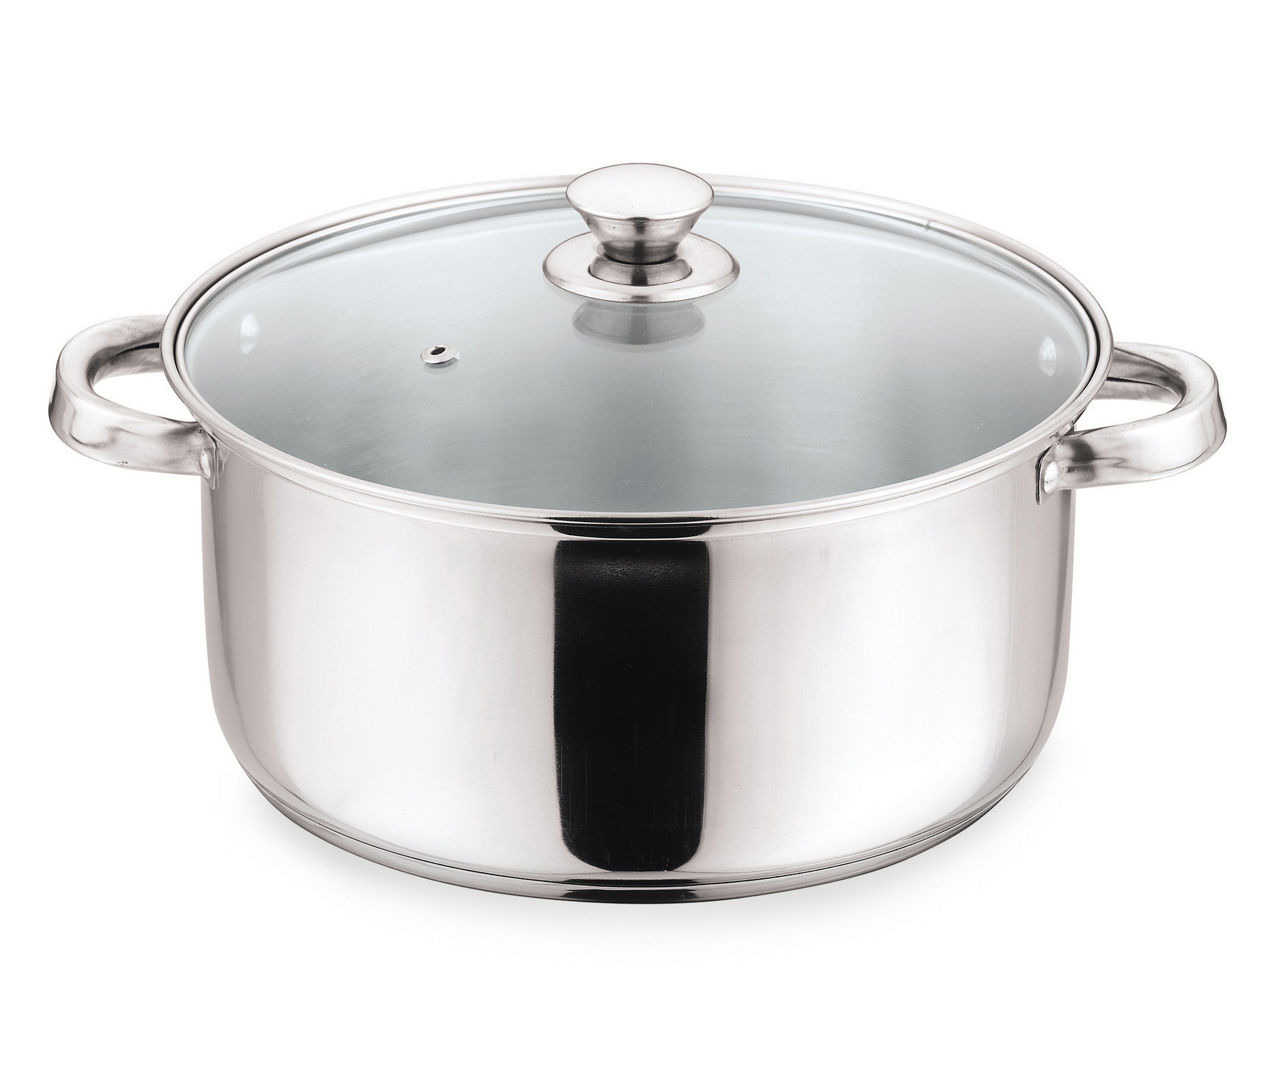 Great Gatherings 5-Quart Stainless Steel Dutch Oven | Big Lots